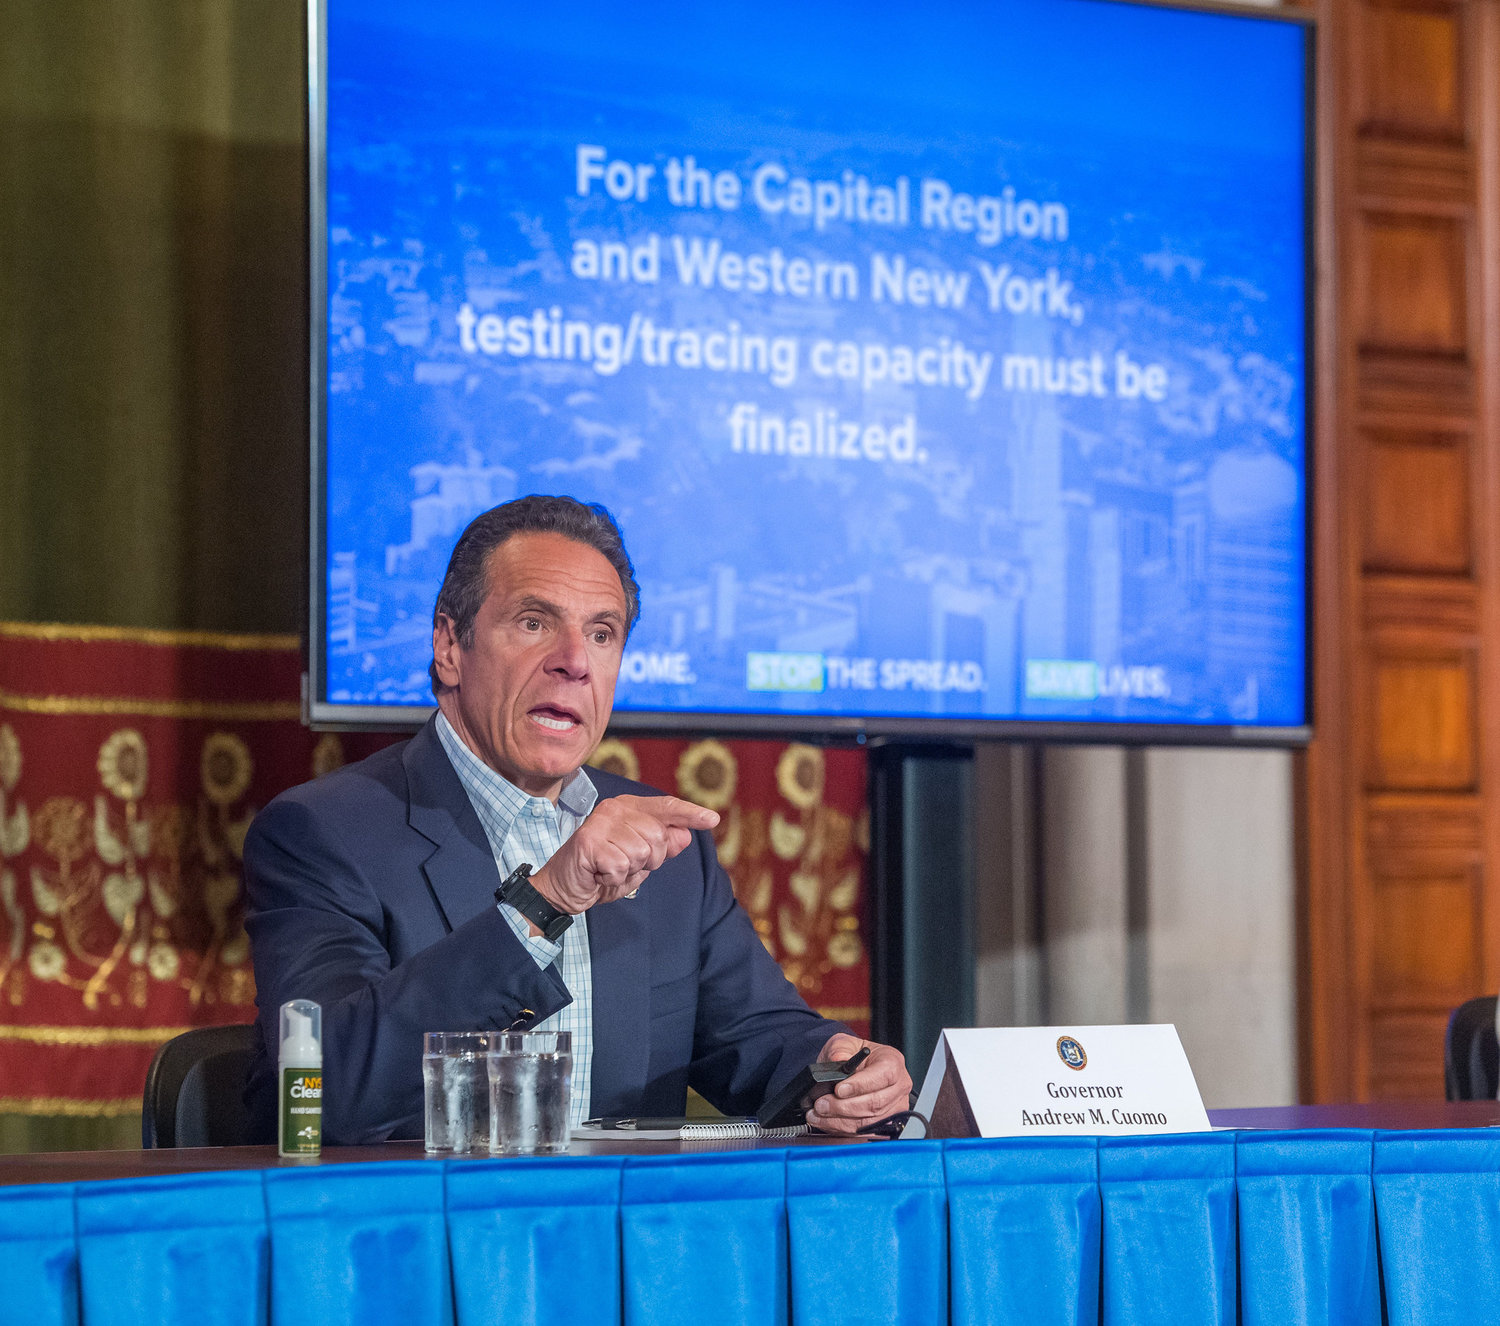 Gov. Andrew Cuomo says all of upstate New York is ready to open, leaving just a few more metrics for downstate areas like New York City to achieve before it can start reopening.